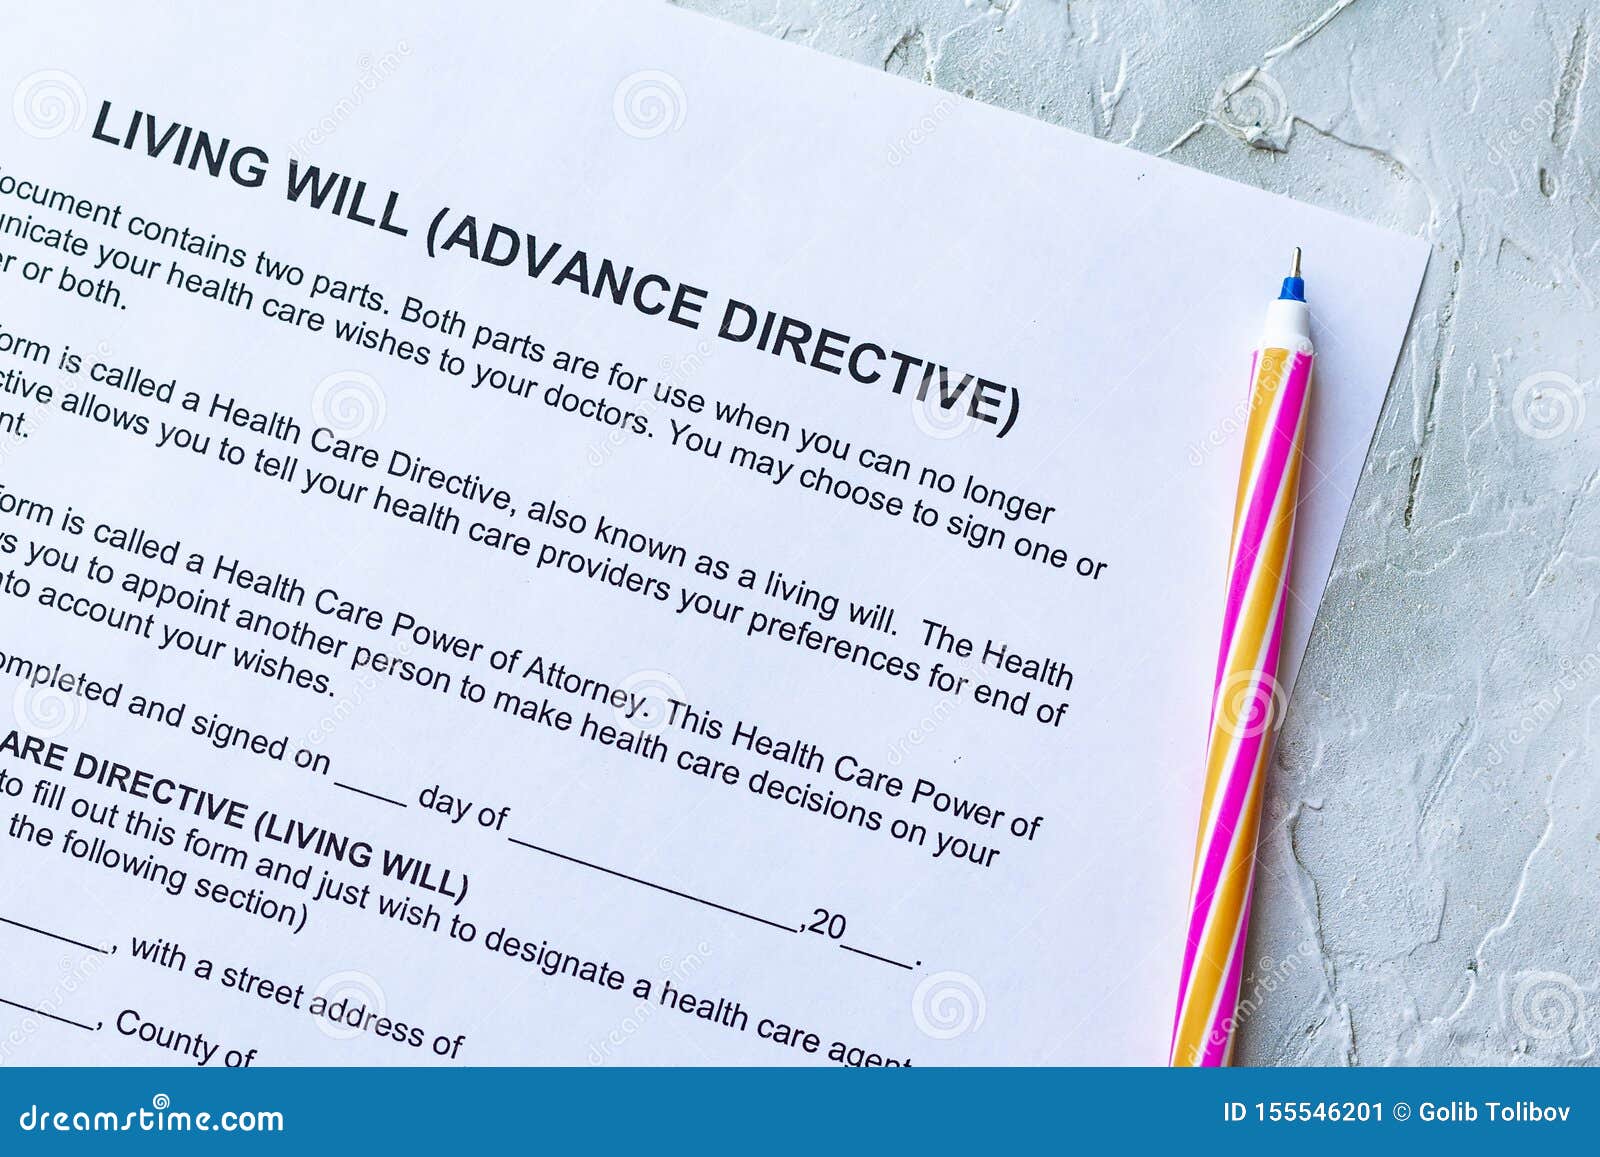 living will advance directive